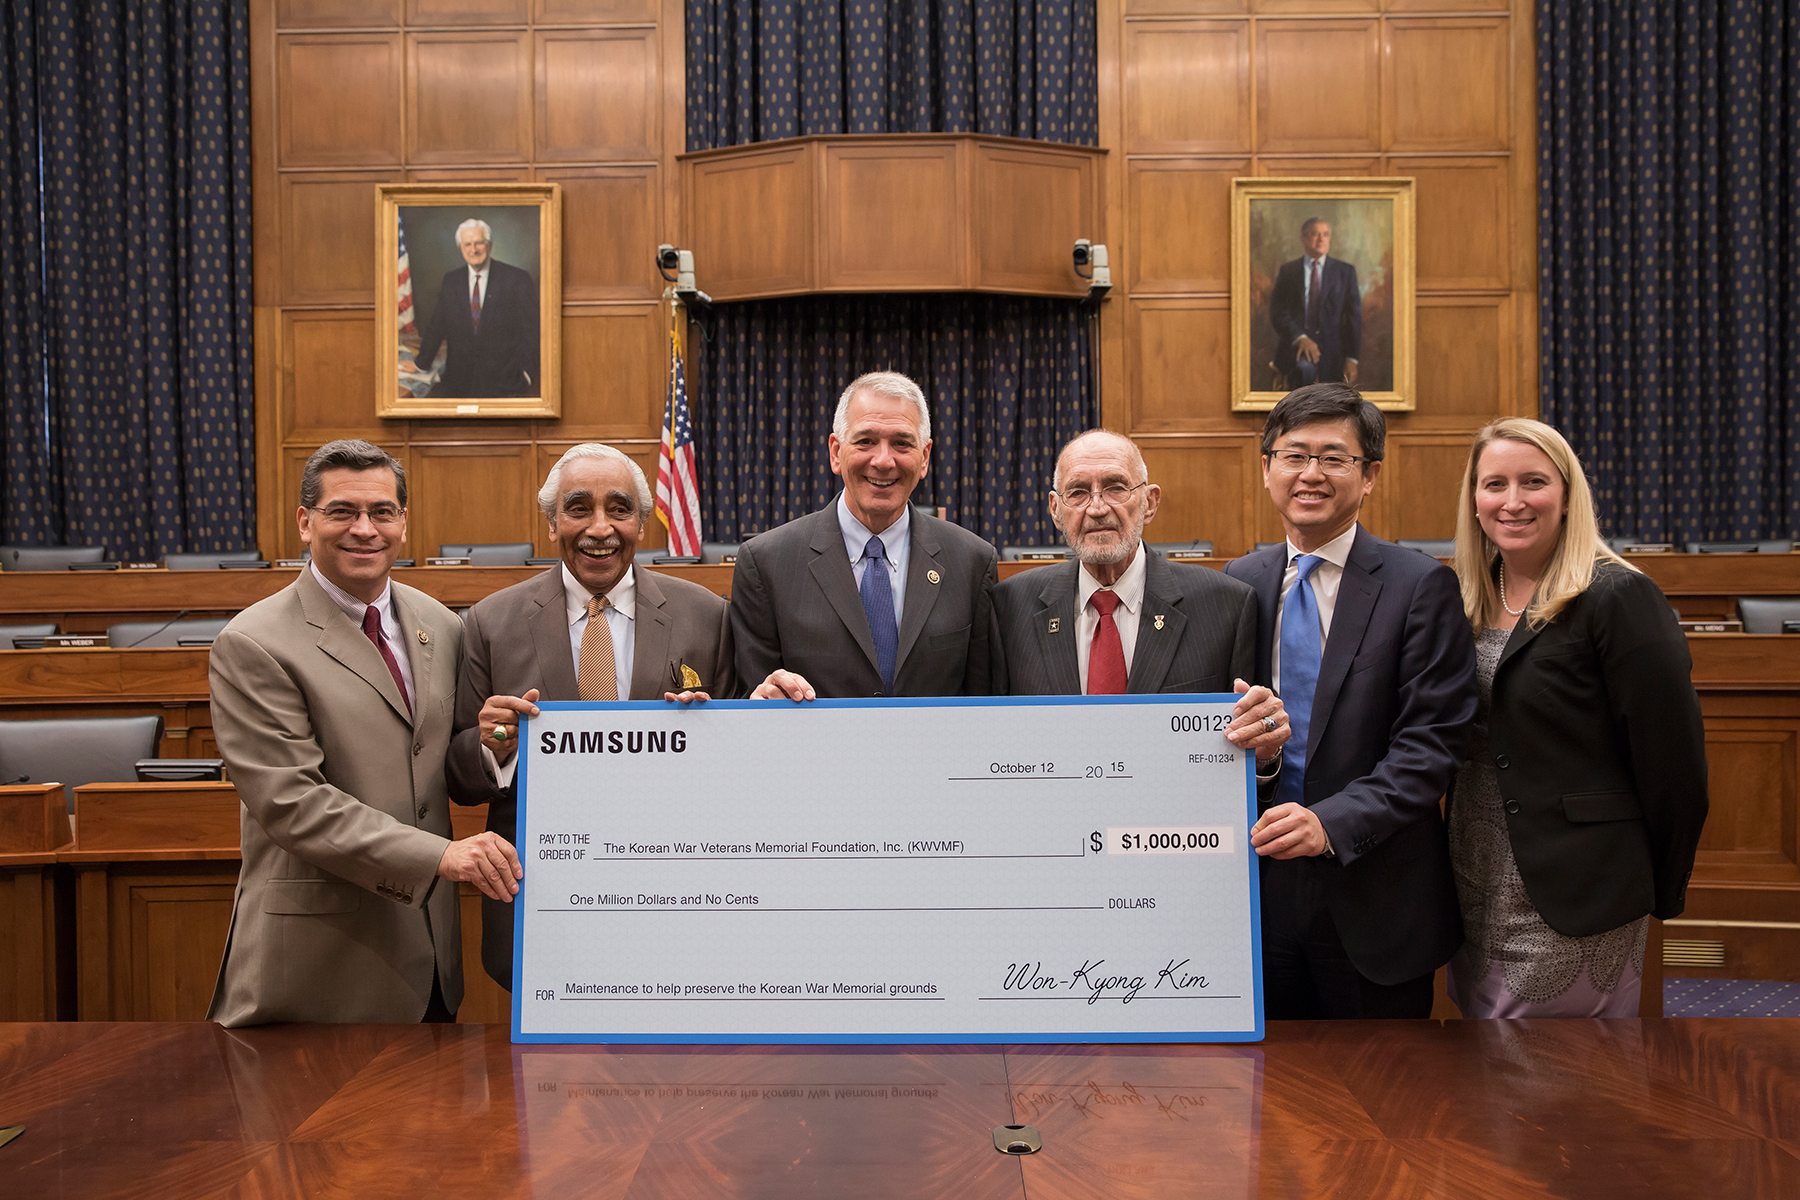 ‘Korean War Veterans Memorial Foundation’s Memorial Fund’ Has Received Donation From Samsung Electronics For Its Maintenance